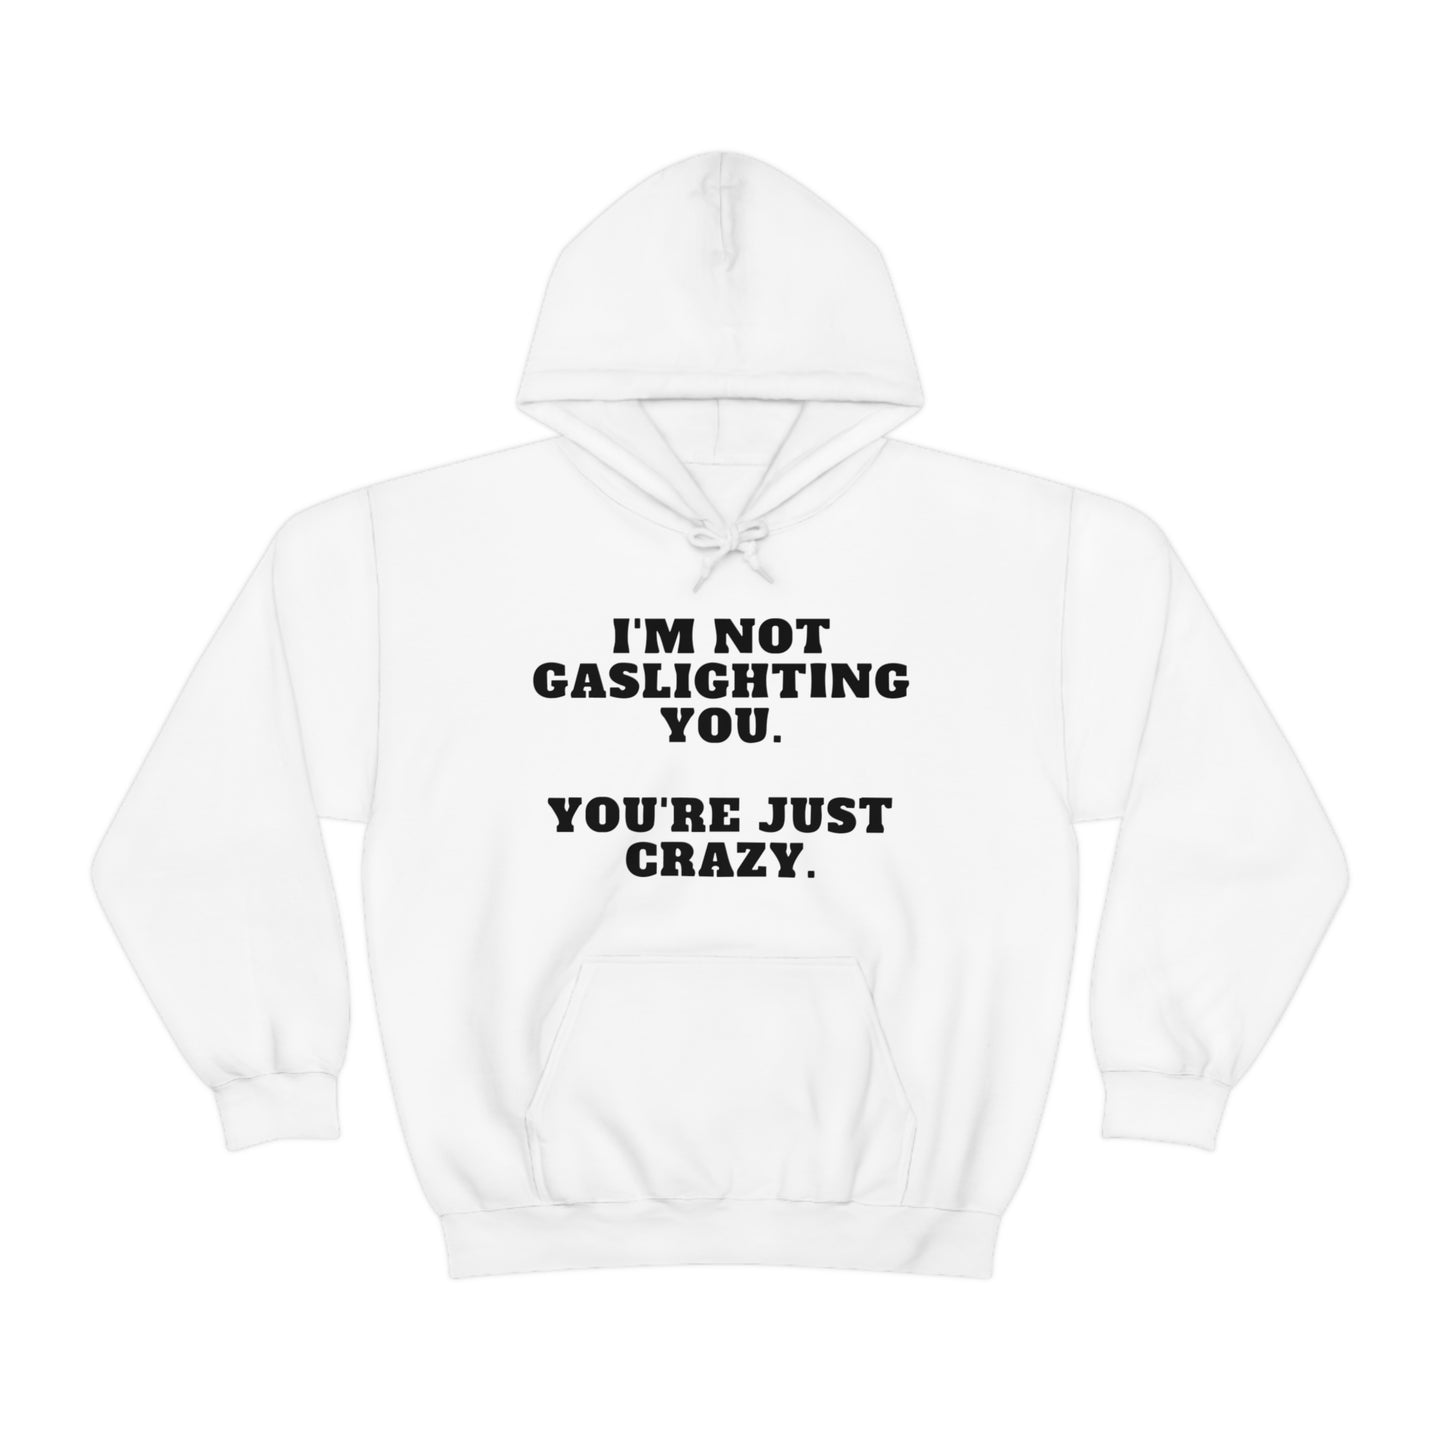 "I'm Not Gaslighting You. You're Just Crazy." Hoodie